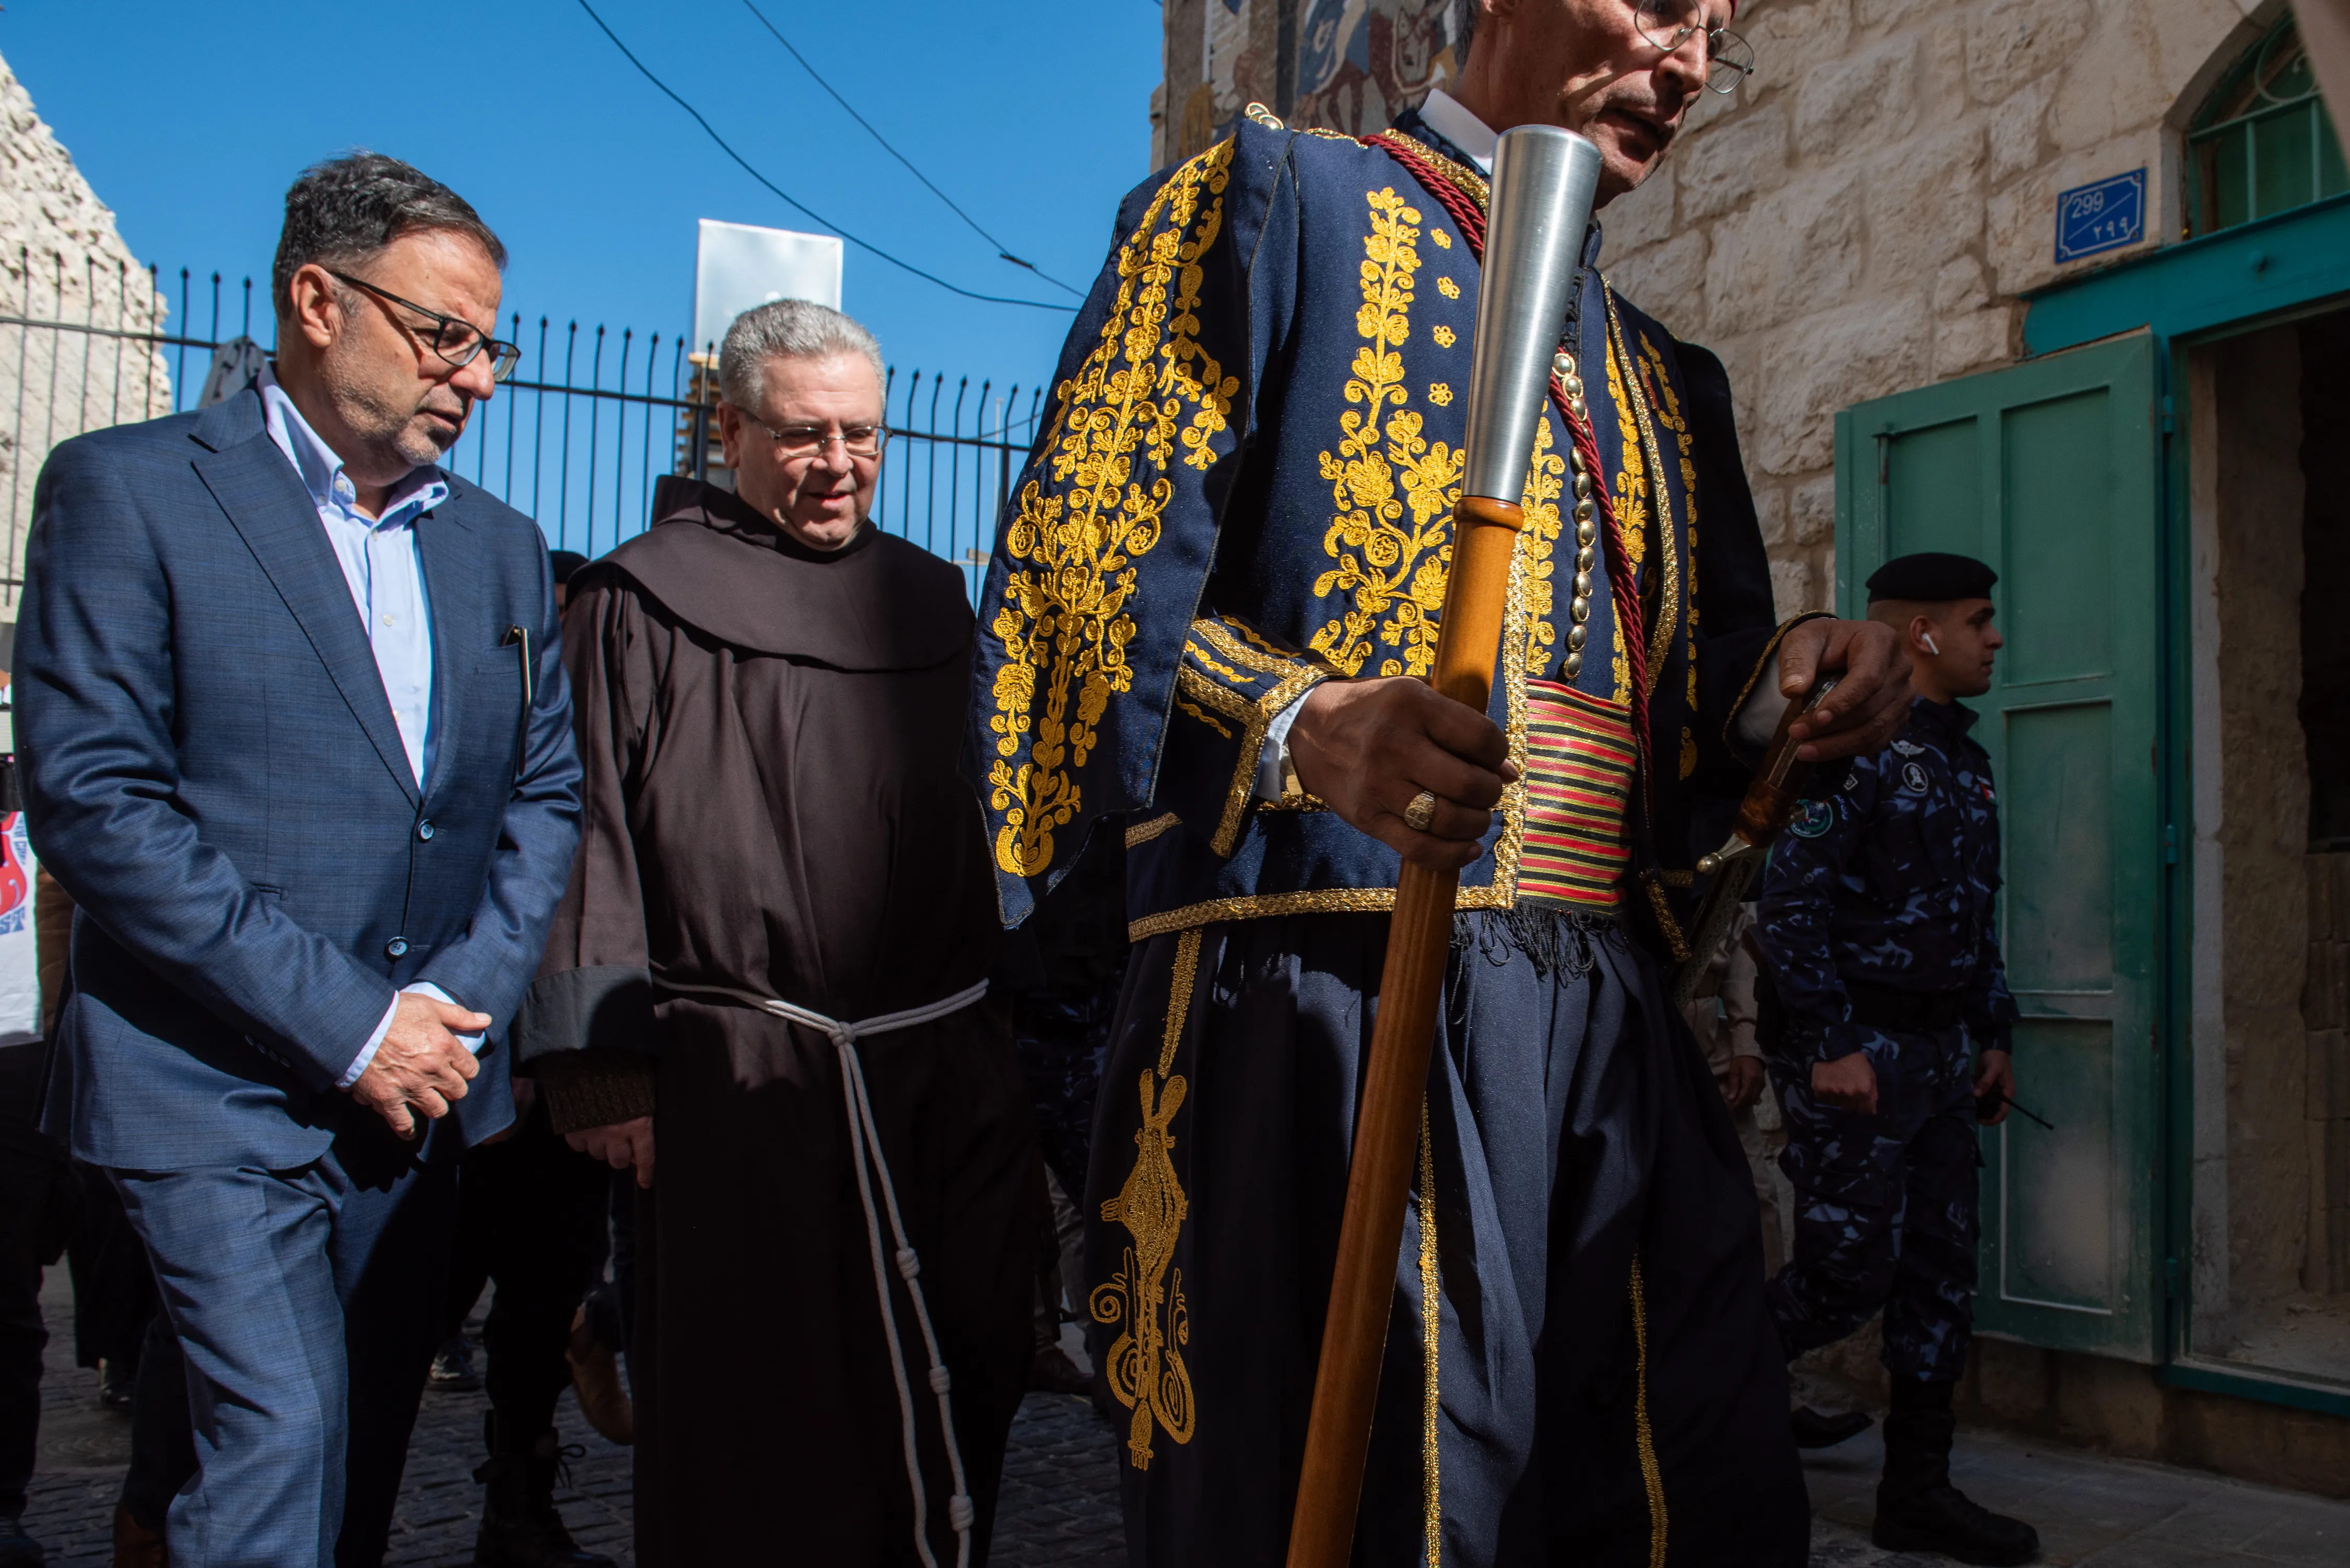 Custos of the Holy Land Father Francis Patton walks along Star Street in Bethlehem during his solemn entrance on Saturday, Dec. 2, 2023, for the beginning of Advent. In front of him is one of the Kawas serving the Custody of the Holy Land. Credit: Marinella Bandini